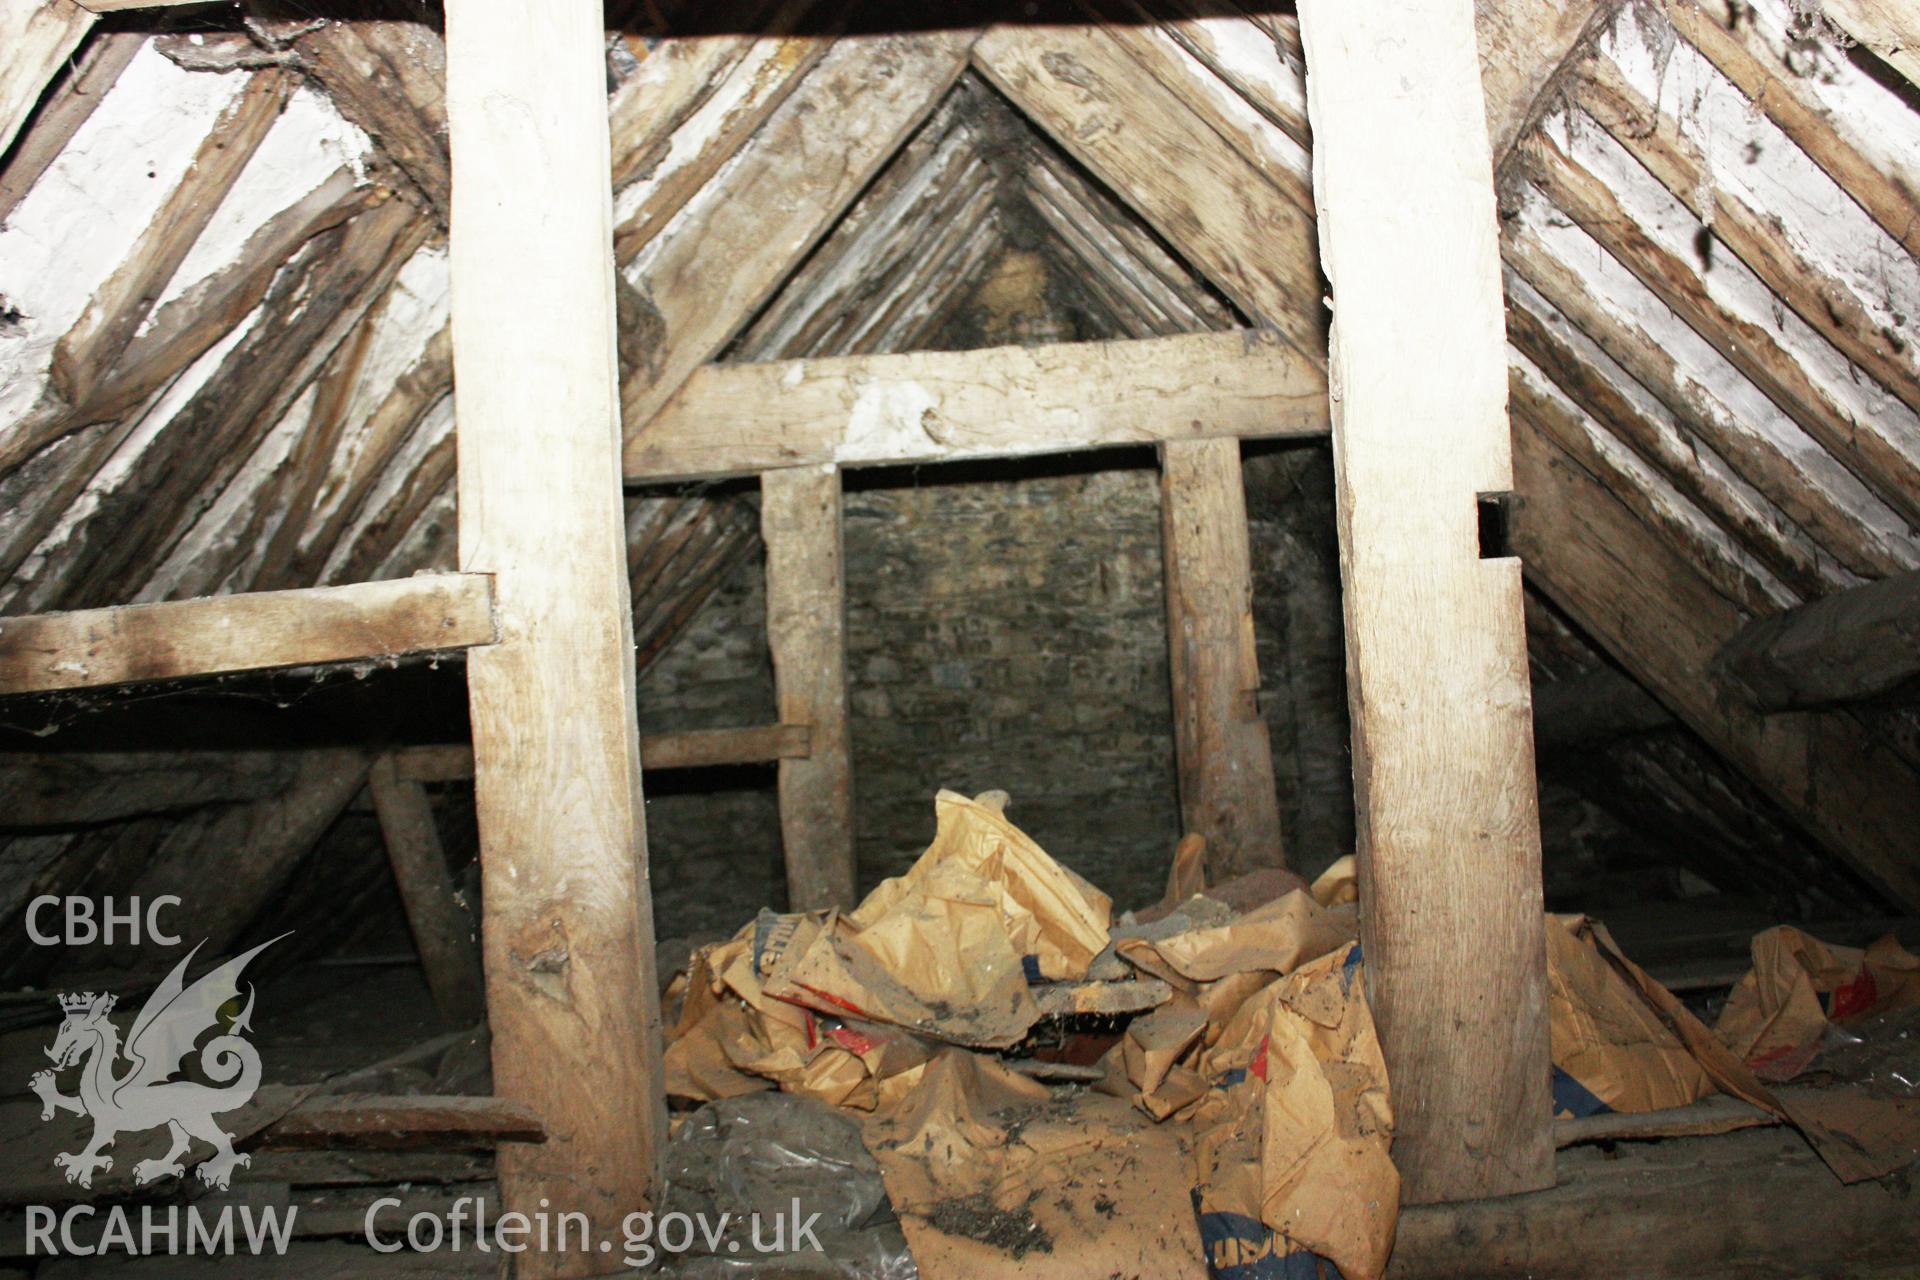 Interior view of timber frame and roof beams at Glanhafon-Fawr Farmhouse. Photographic survey of Glanhafon-Fawr Farmhouse conducted by Geoff Ward on 4th November 2010.